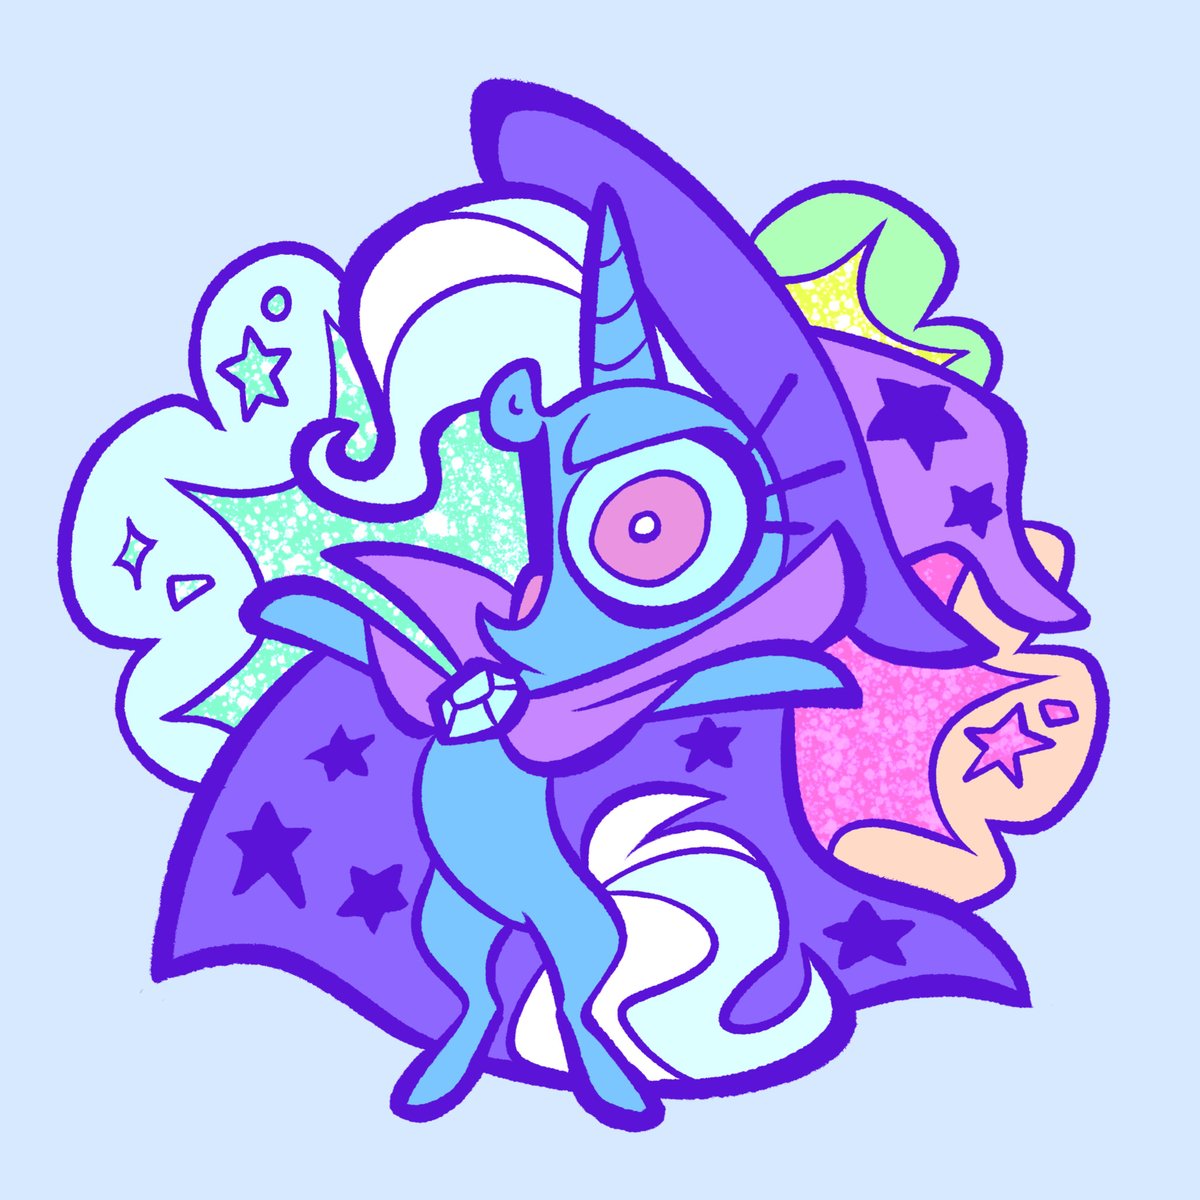 「lil Trixie pin as a stretch goal for the」|Jane Walker 🎉のイラスト